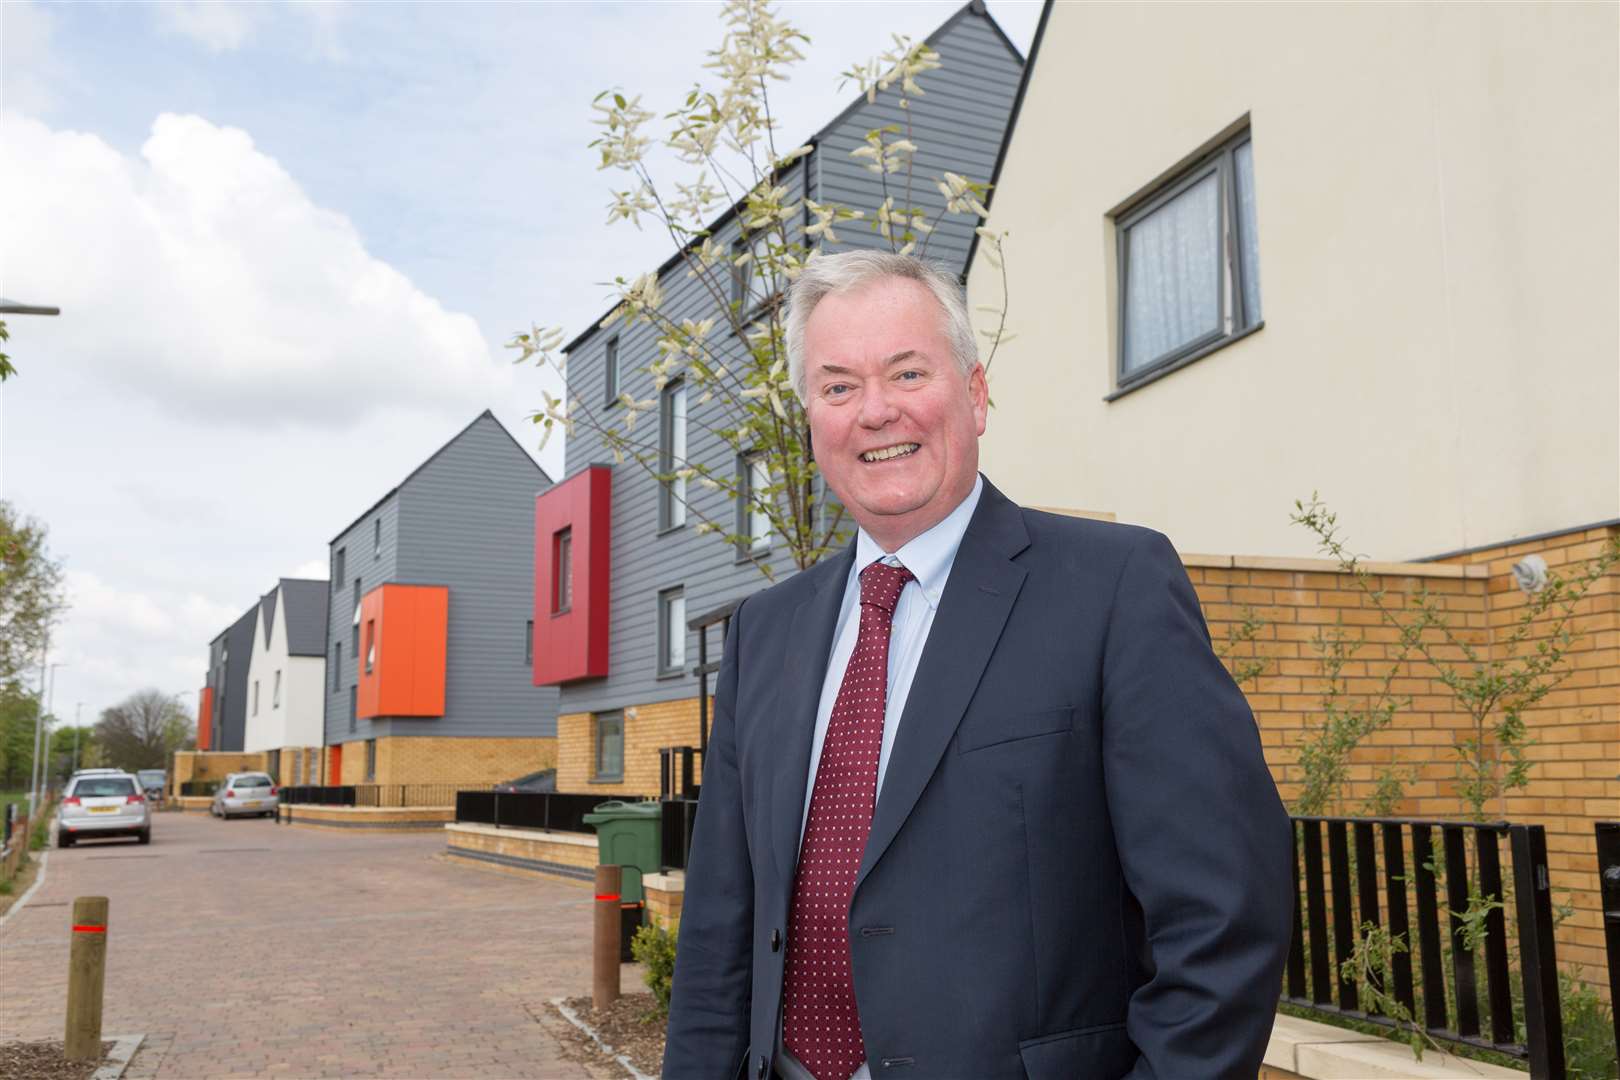 Golding Homes chief executive Peter Stringer at Wallis Fields, a £50m regeneration of the Park Wood Estate in Maidstone